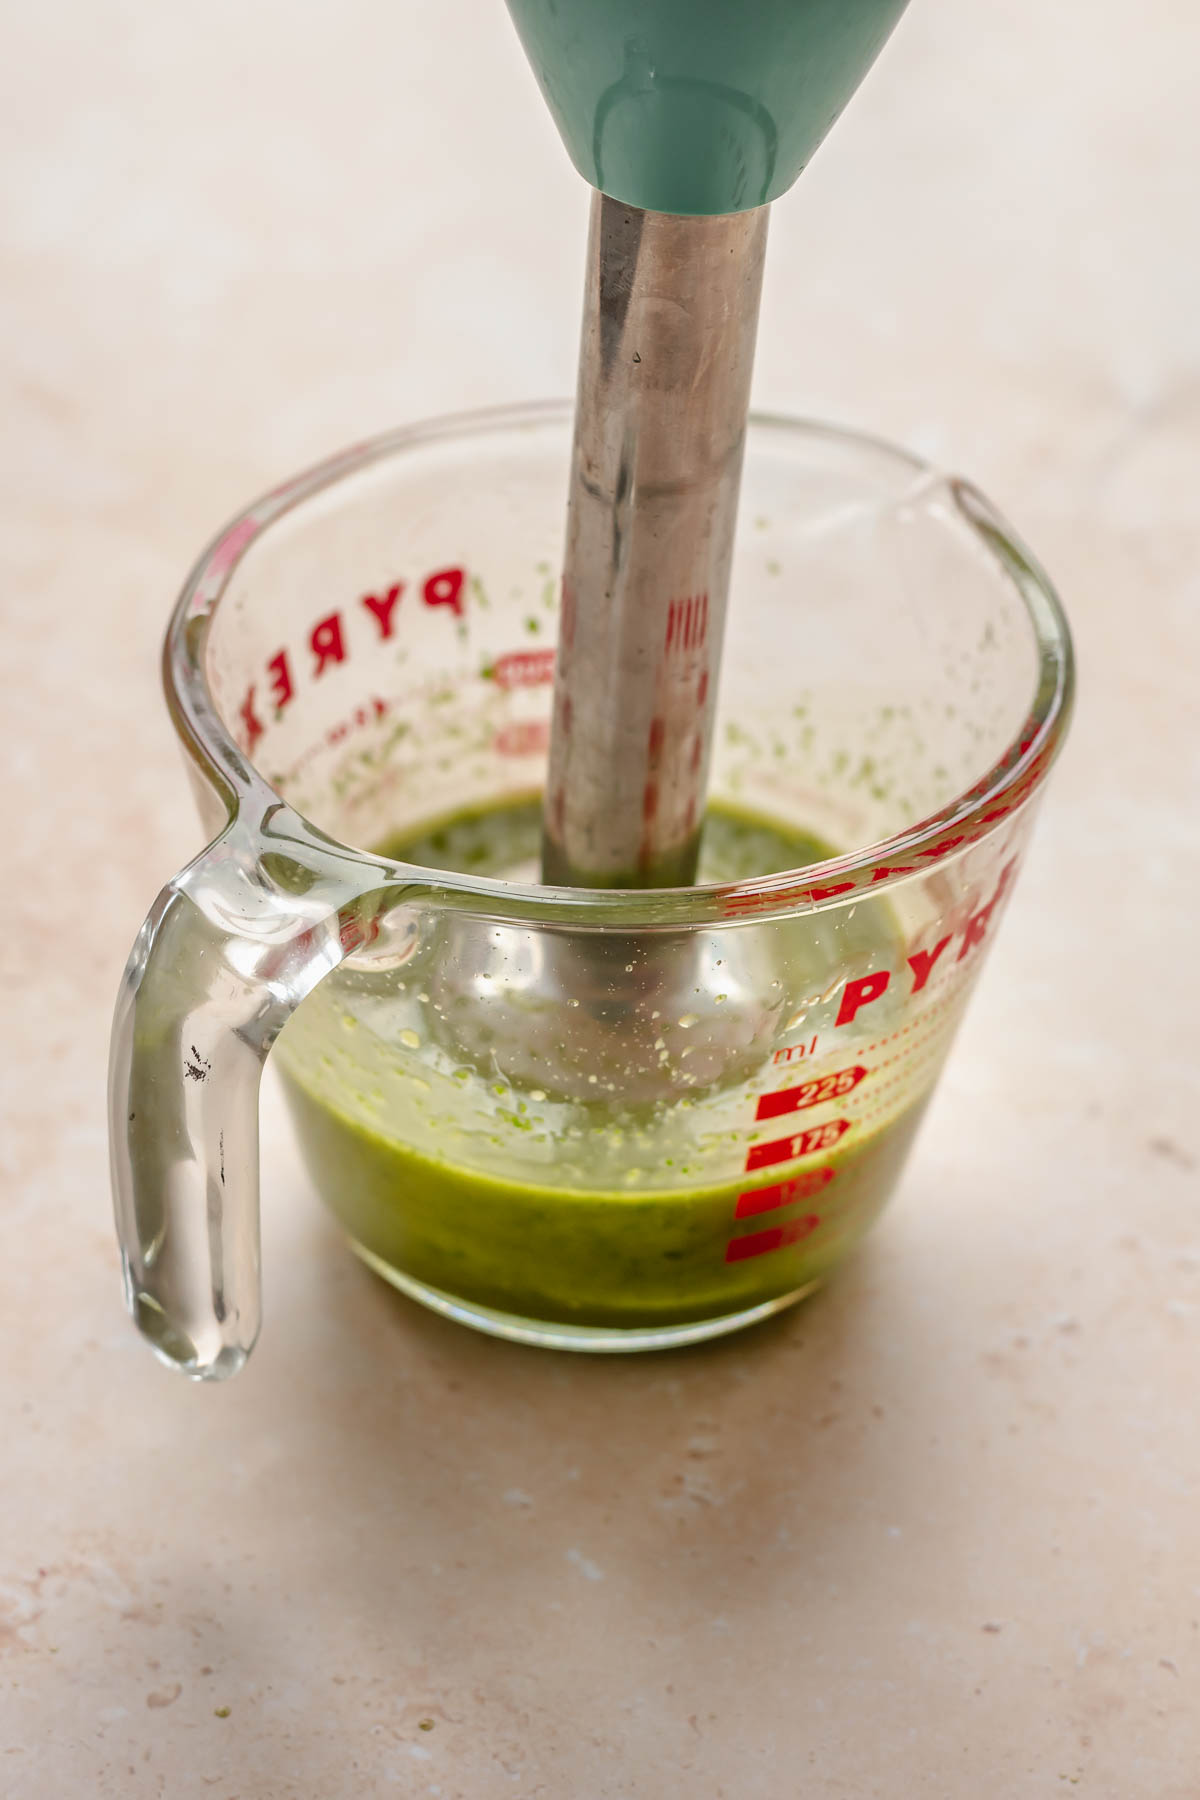 An immersion blender blends basil and garlic oil in a glass measuring cup.